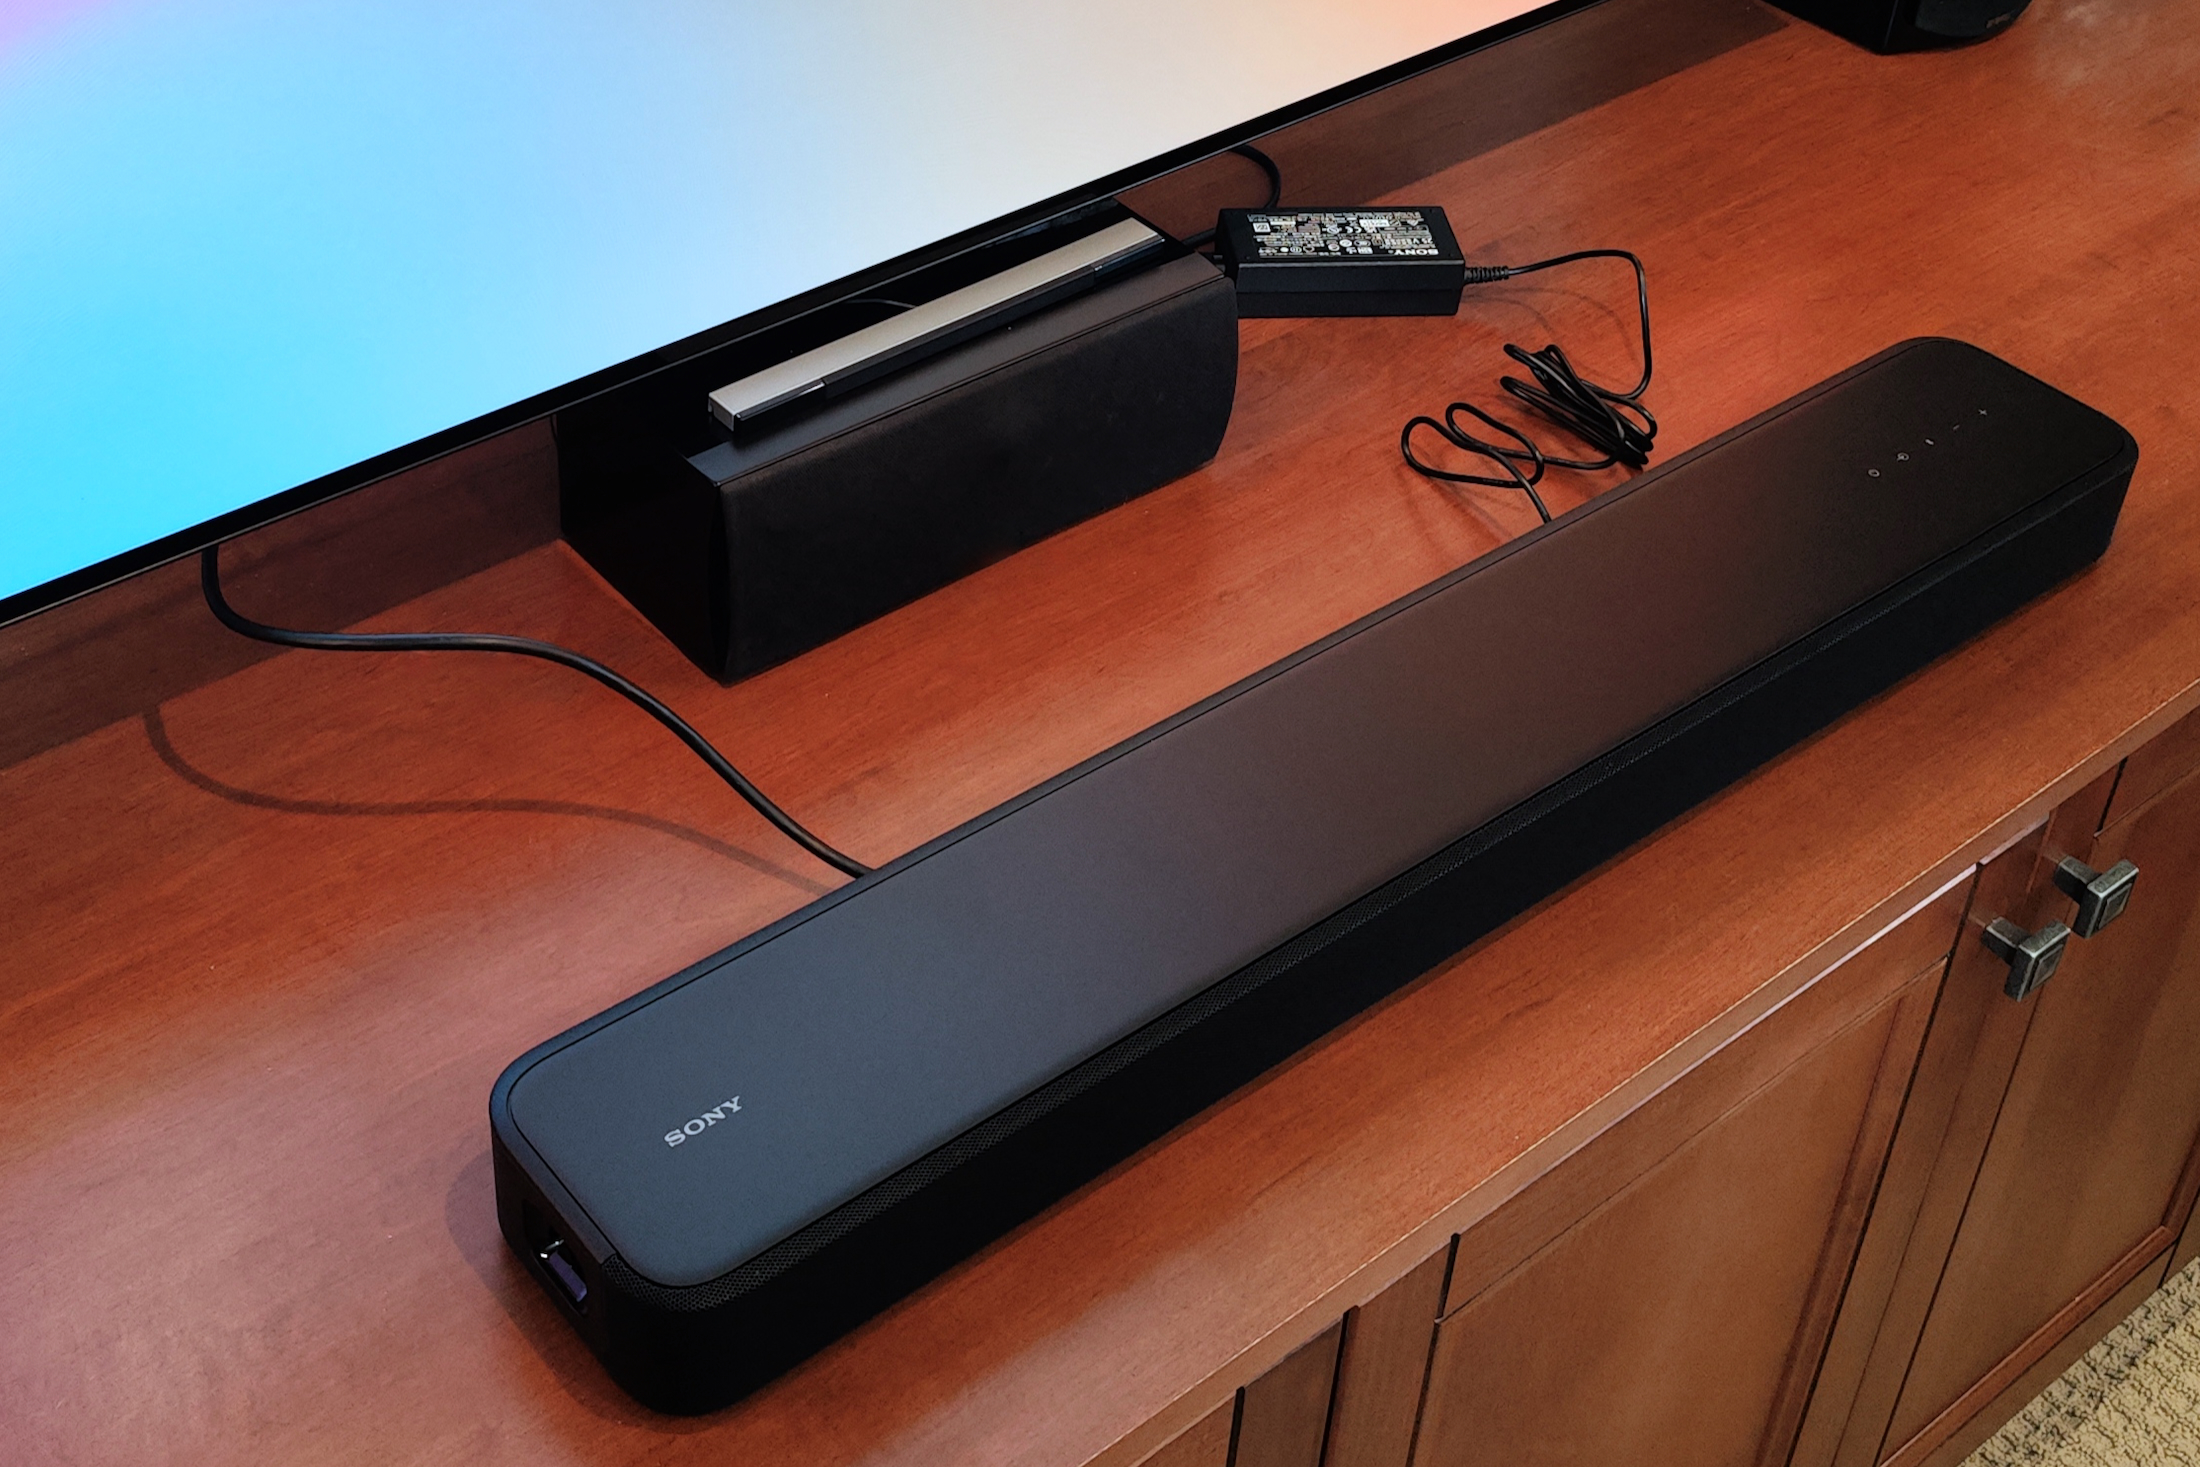 Sony HT-S2000 review: Sony trades smarts for bigger sound | Digital Trends